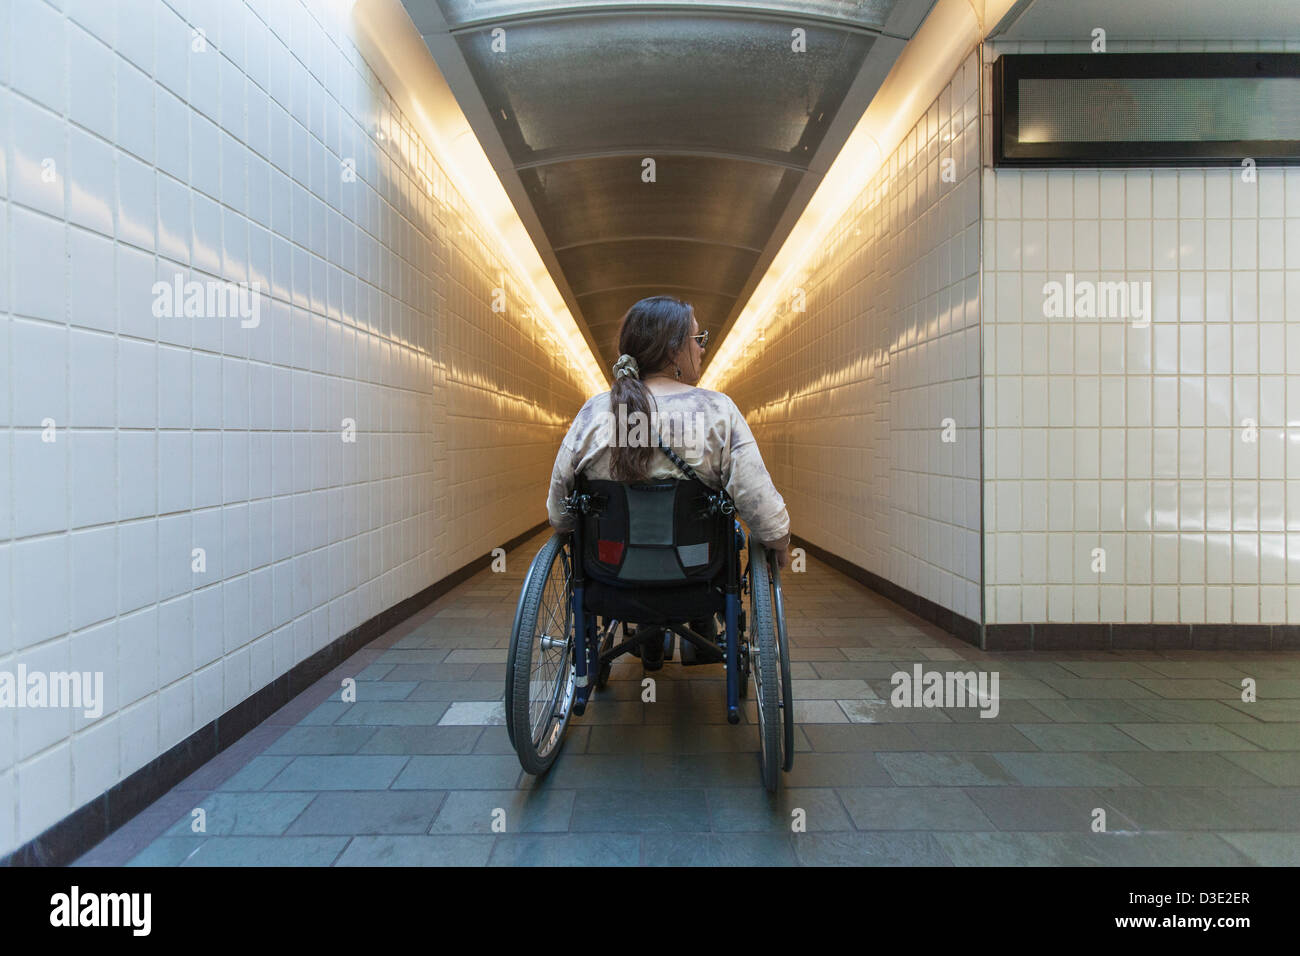 Woman with spinal cord injury in a wheelchair accessing subway train station, Boston, Massachusetts, USA Stock Photo